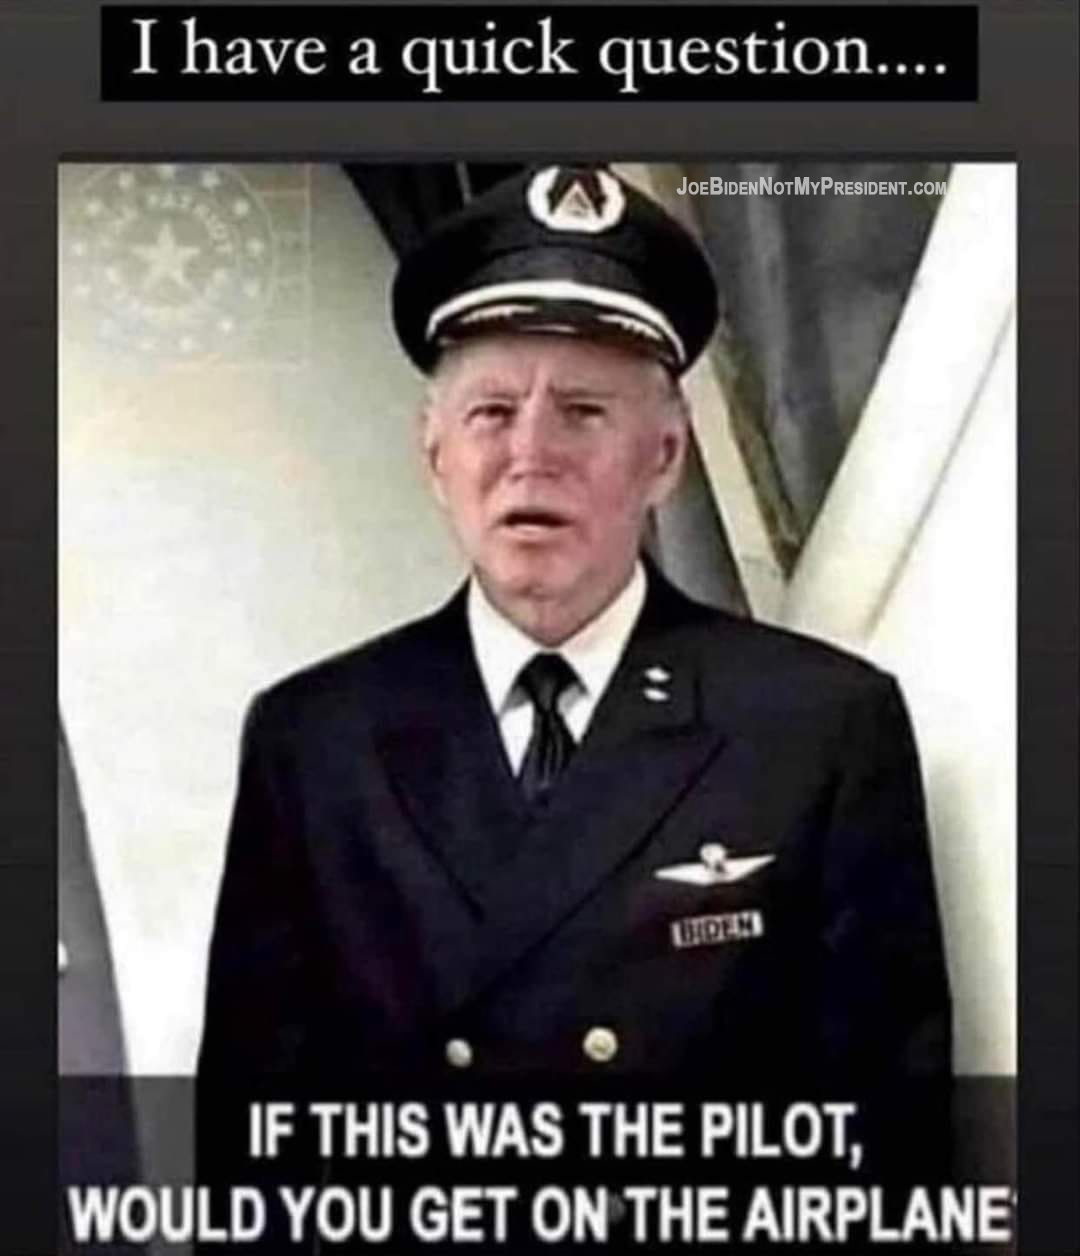 If this was your pilot